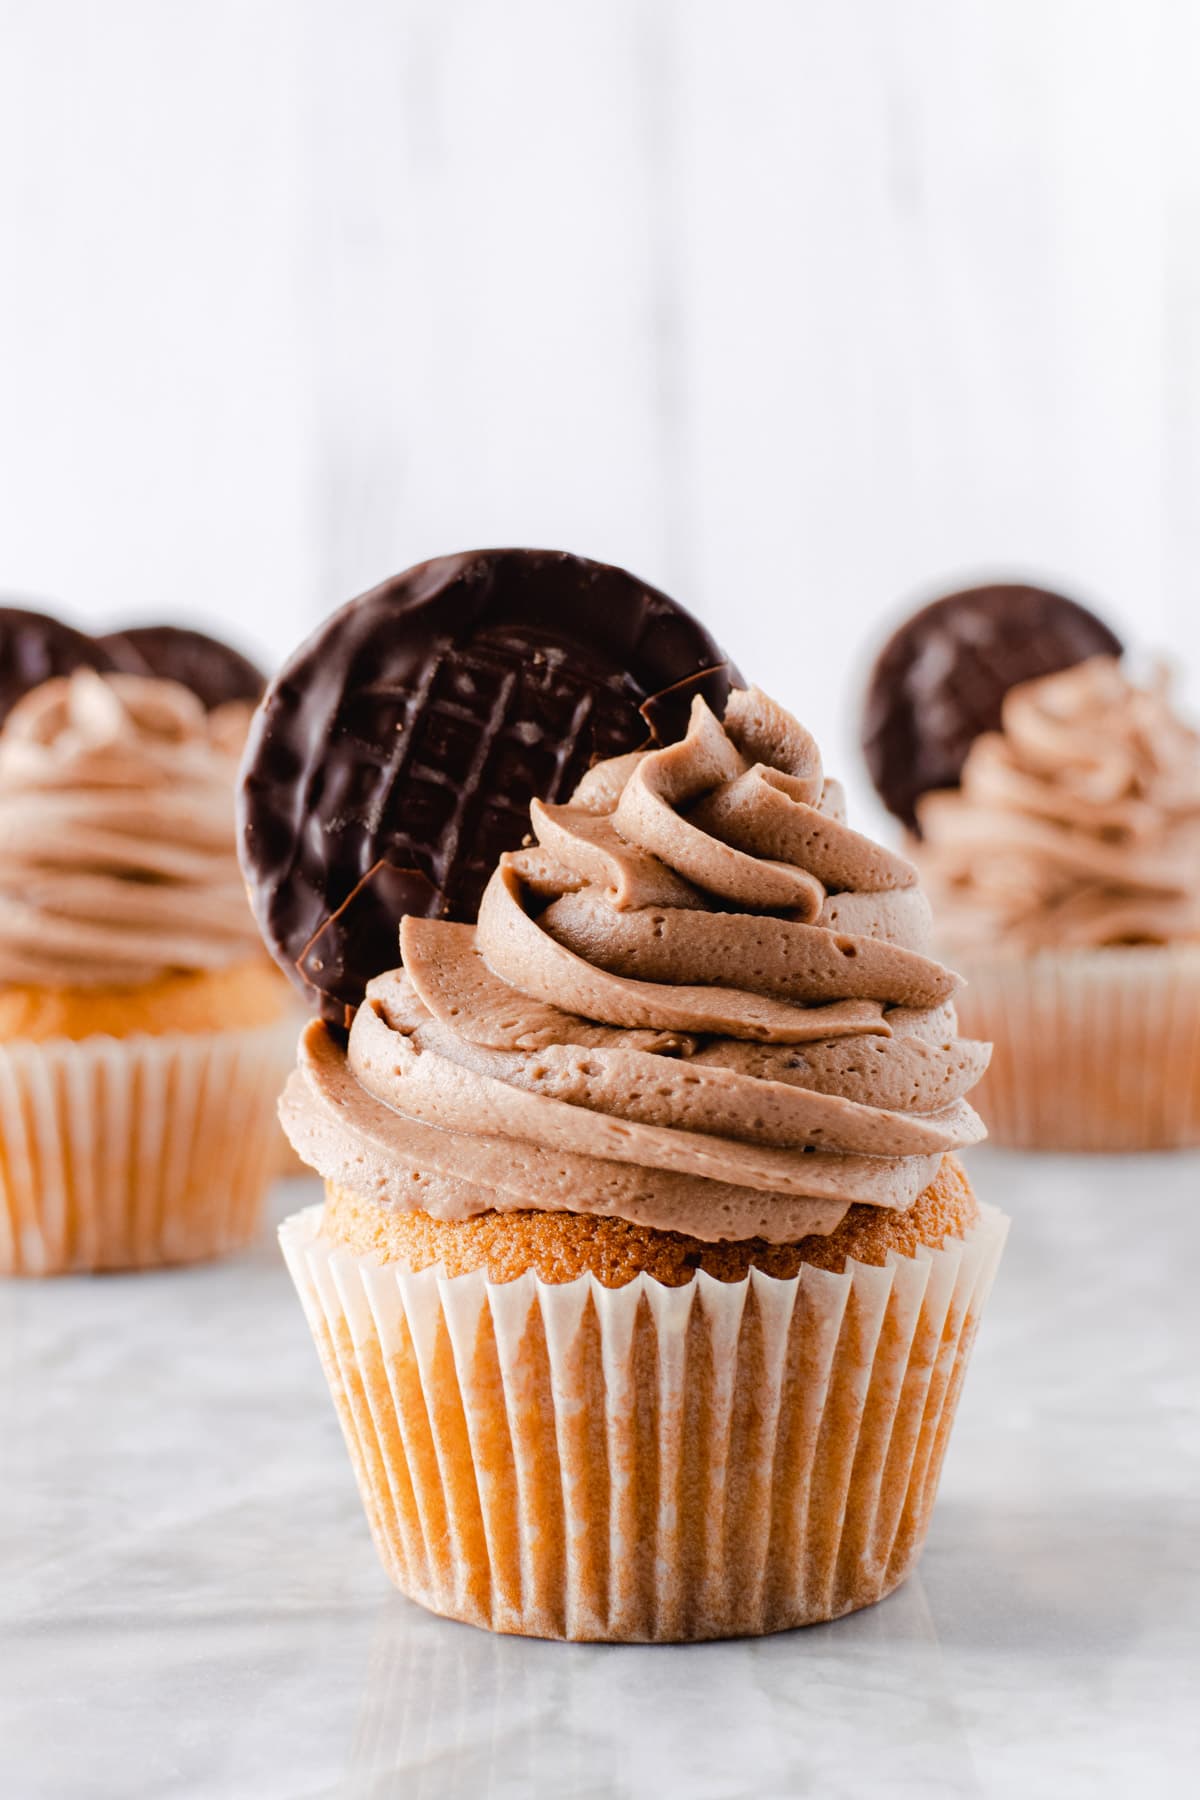 Cupcakes topped with orange chocolate frosting and Jaffa Cakes